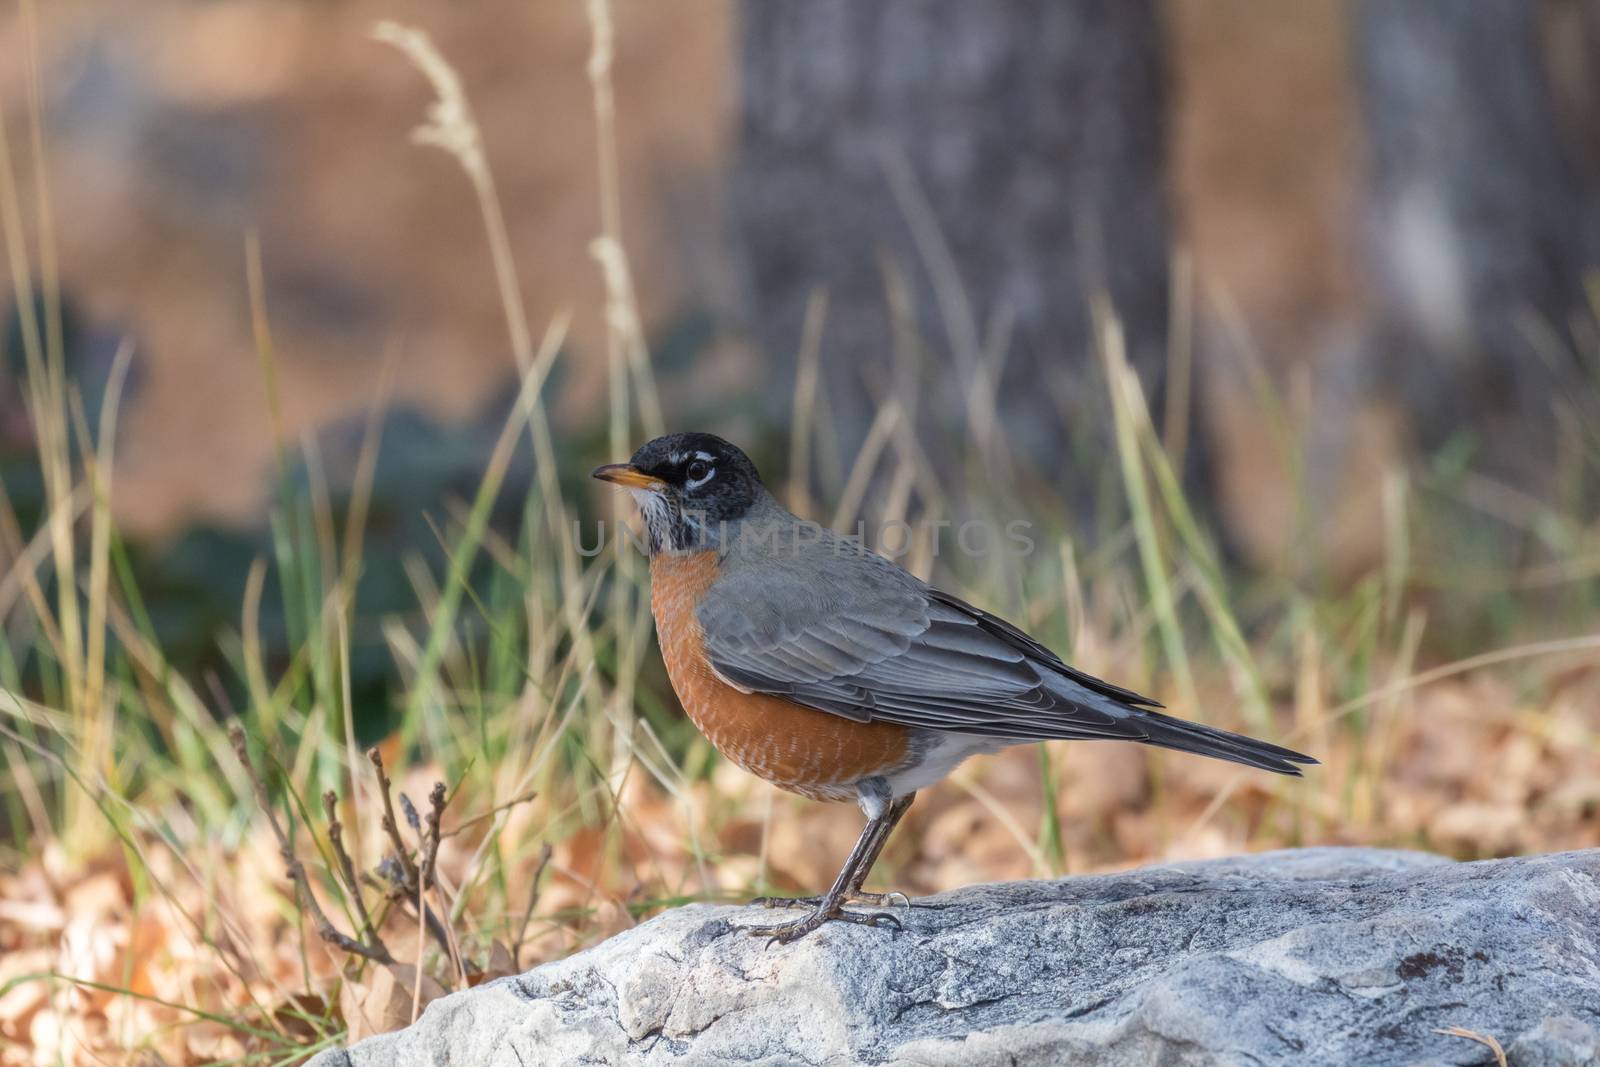 A closeup view of a red-breasted American Robin in the late autumn on a background of fallen leaves. Arizona, US.